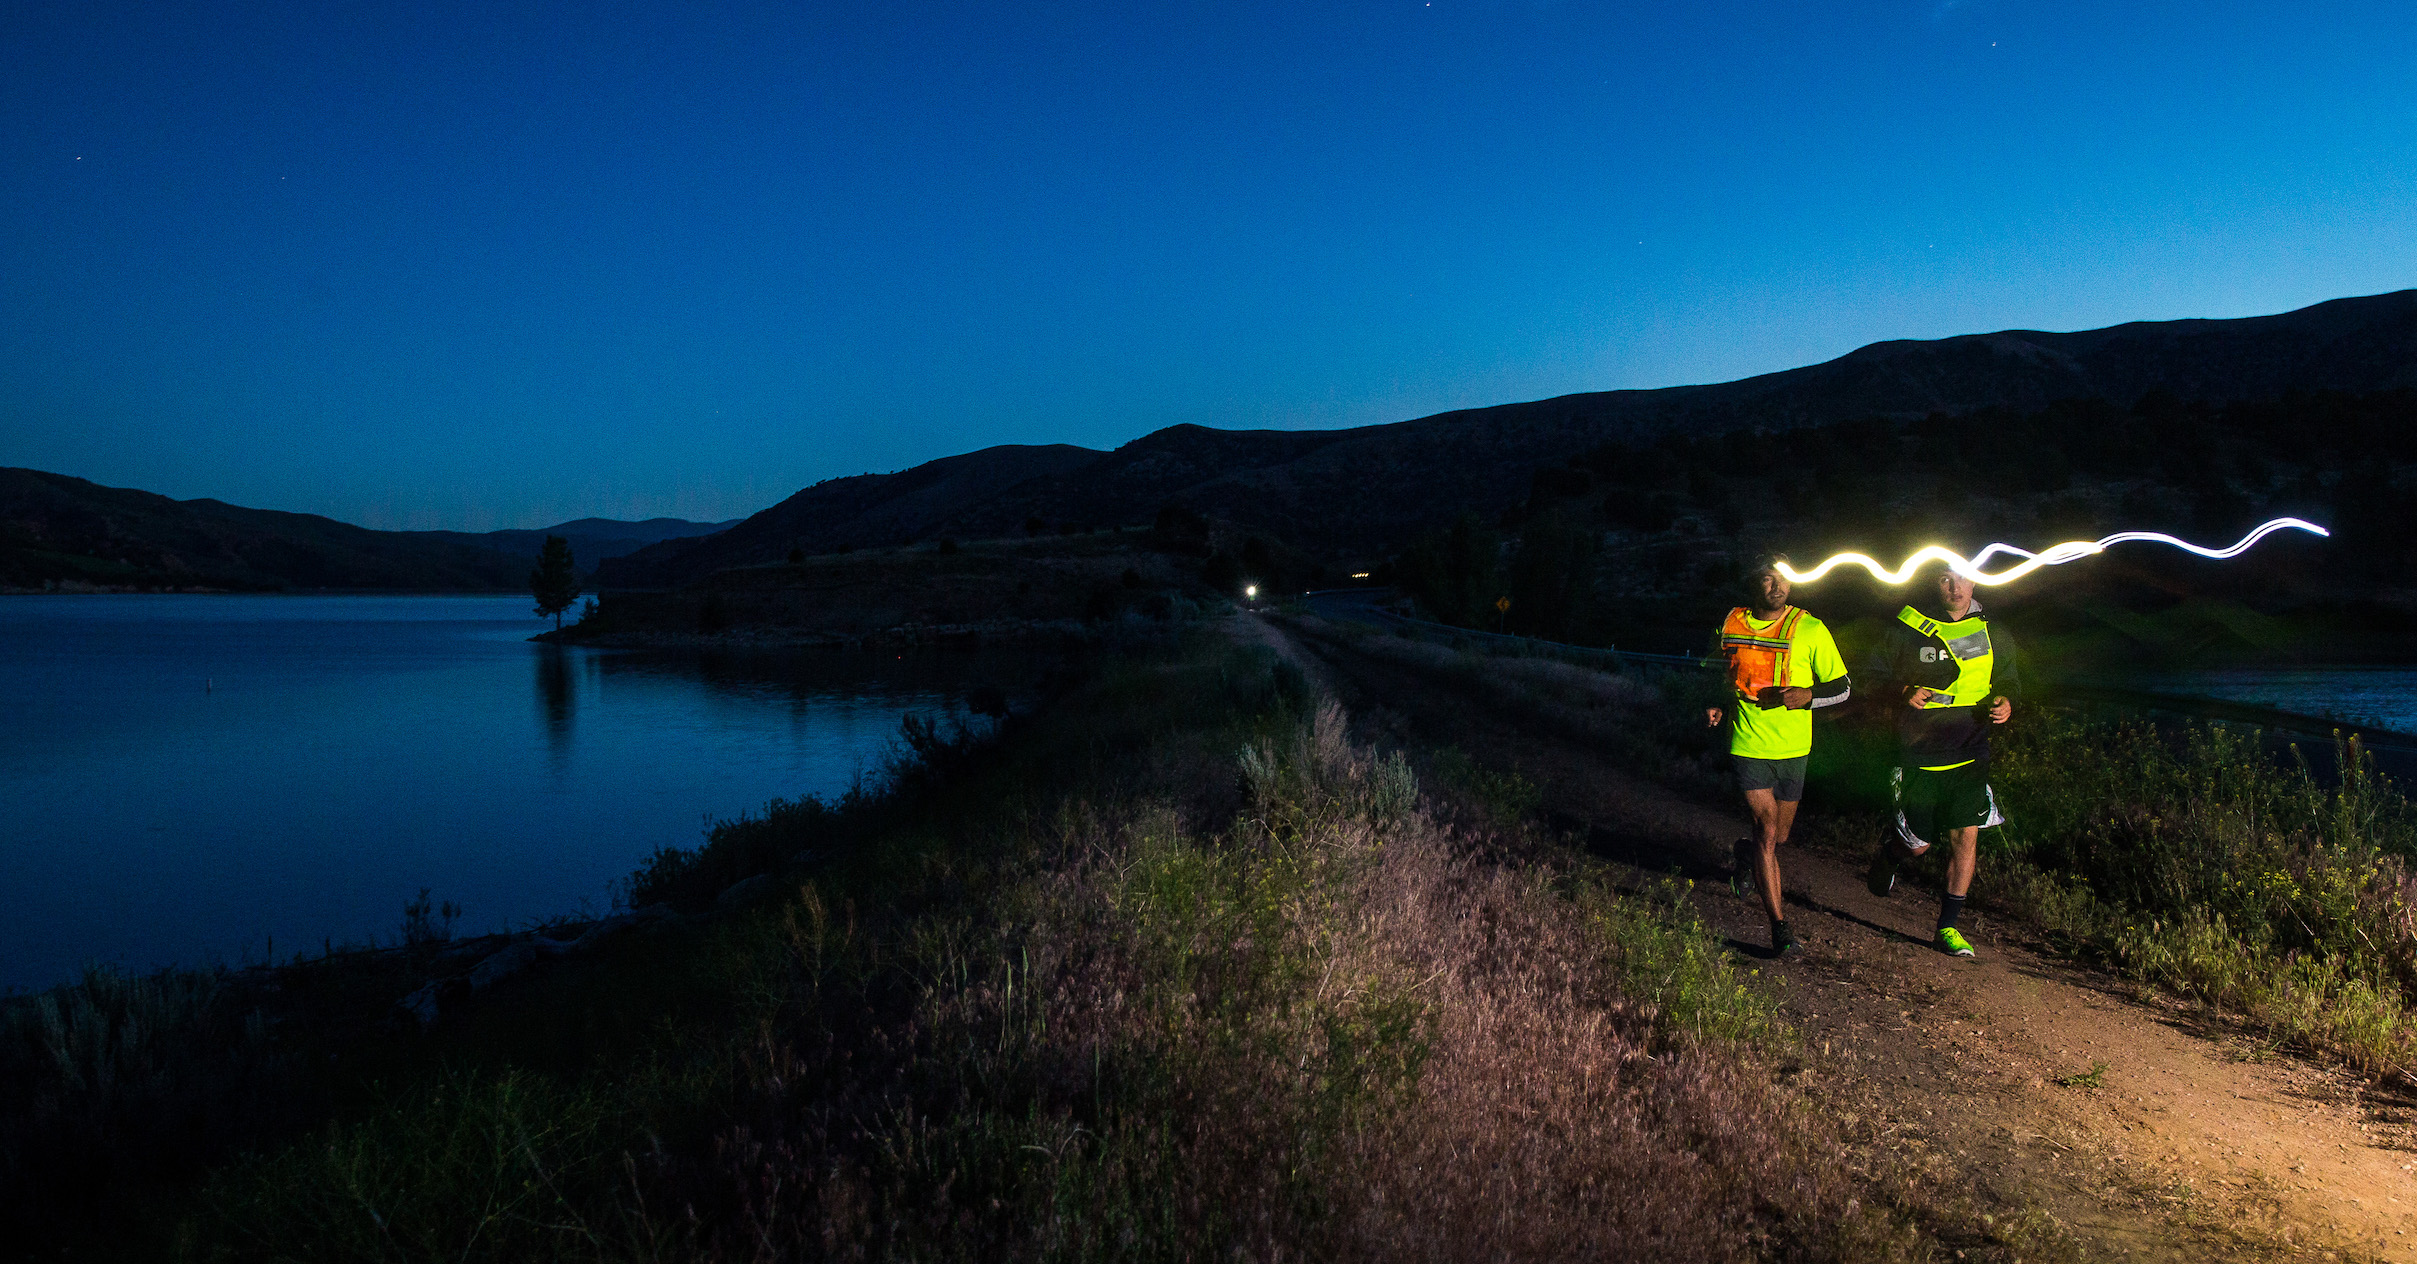 Running with friends in the dark at Ragnar